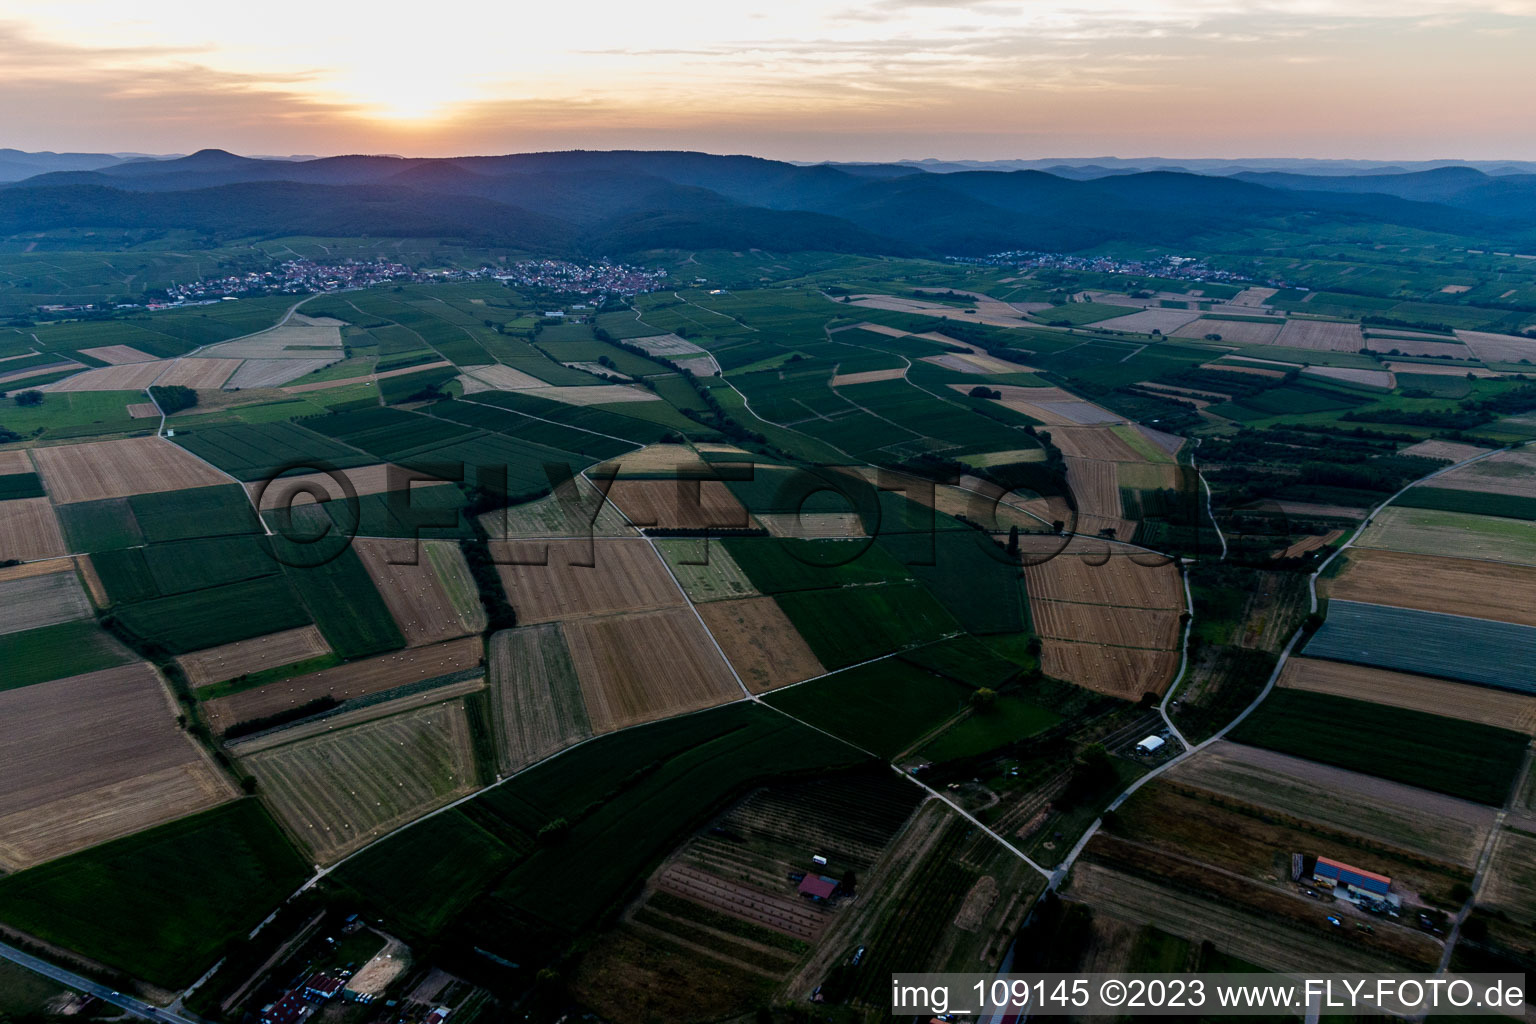 Aerial photograpy of Schweighofen in the state Rhineland-Palatinate, Germany